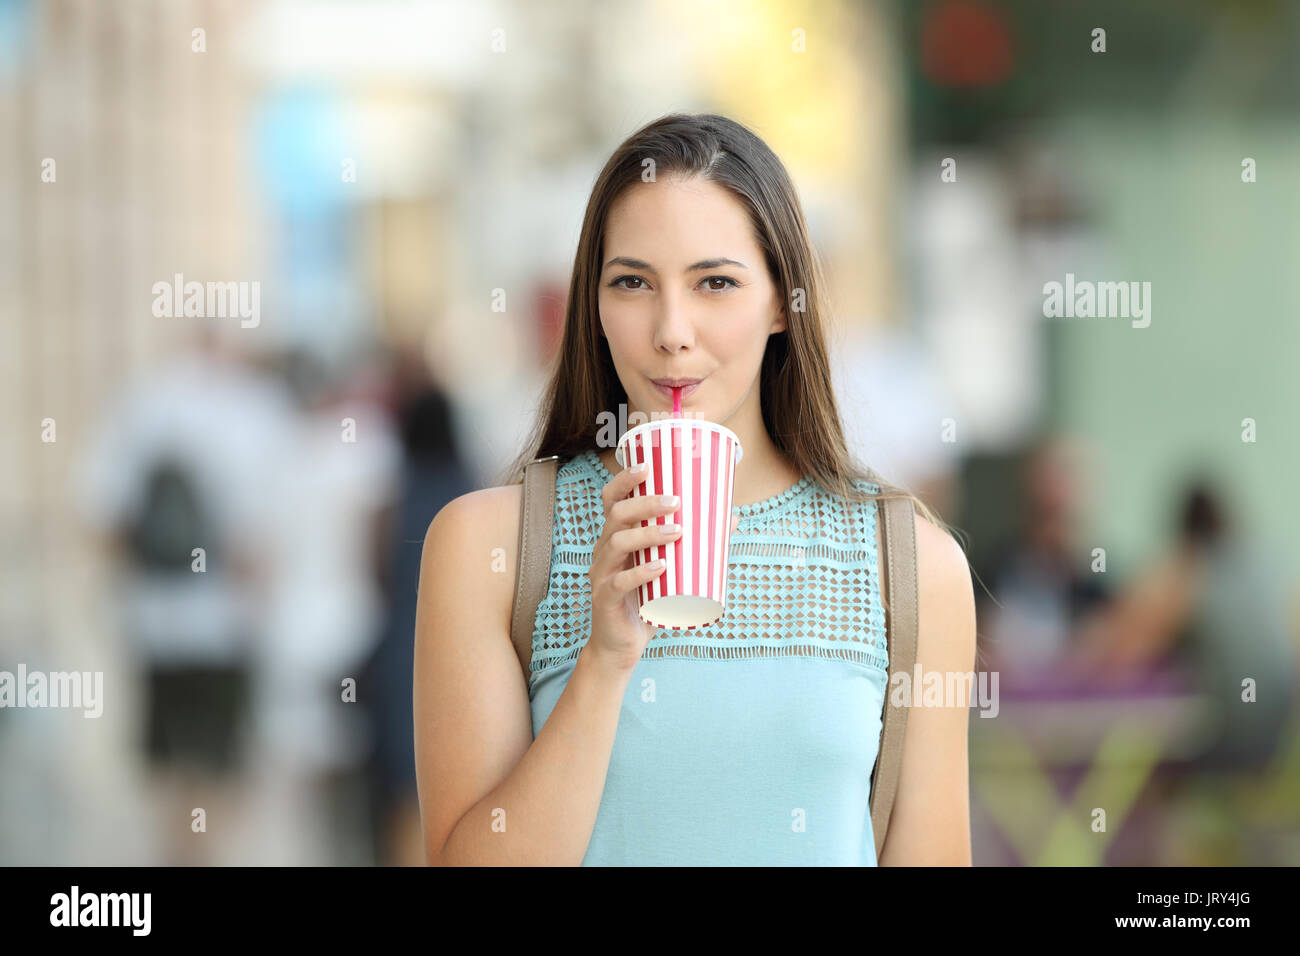 Front view of a girl sipping a takeaway drink walking on the street Stock Photo